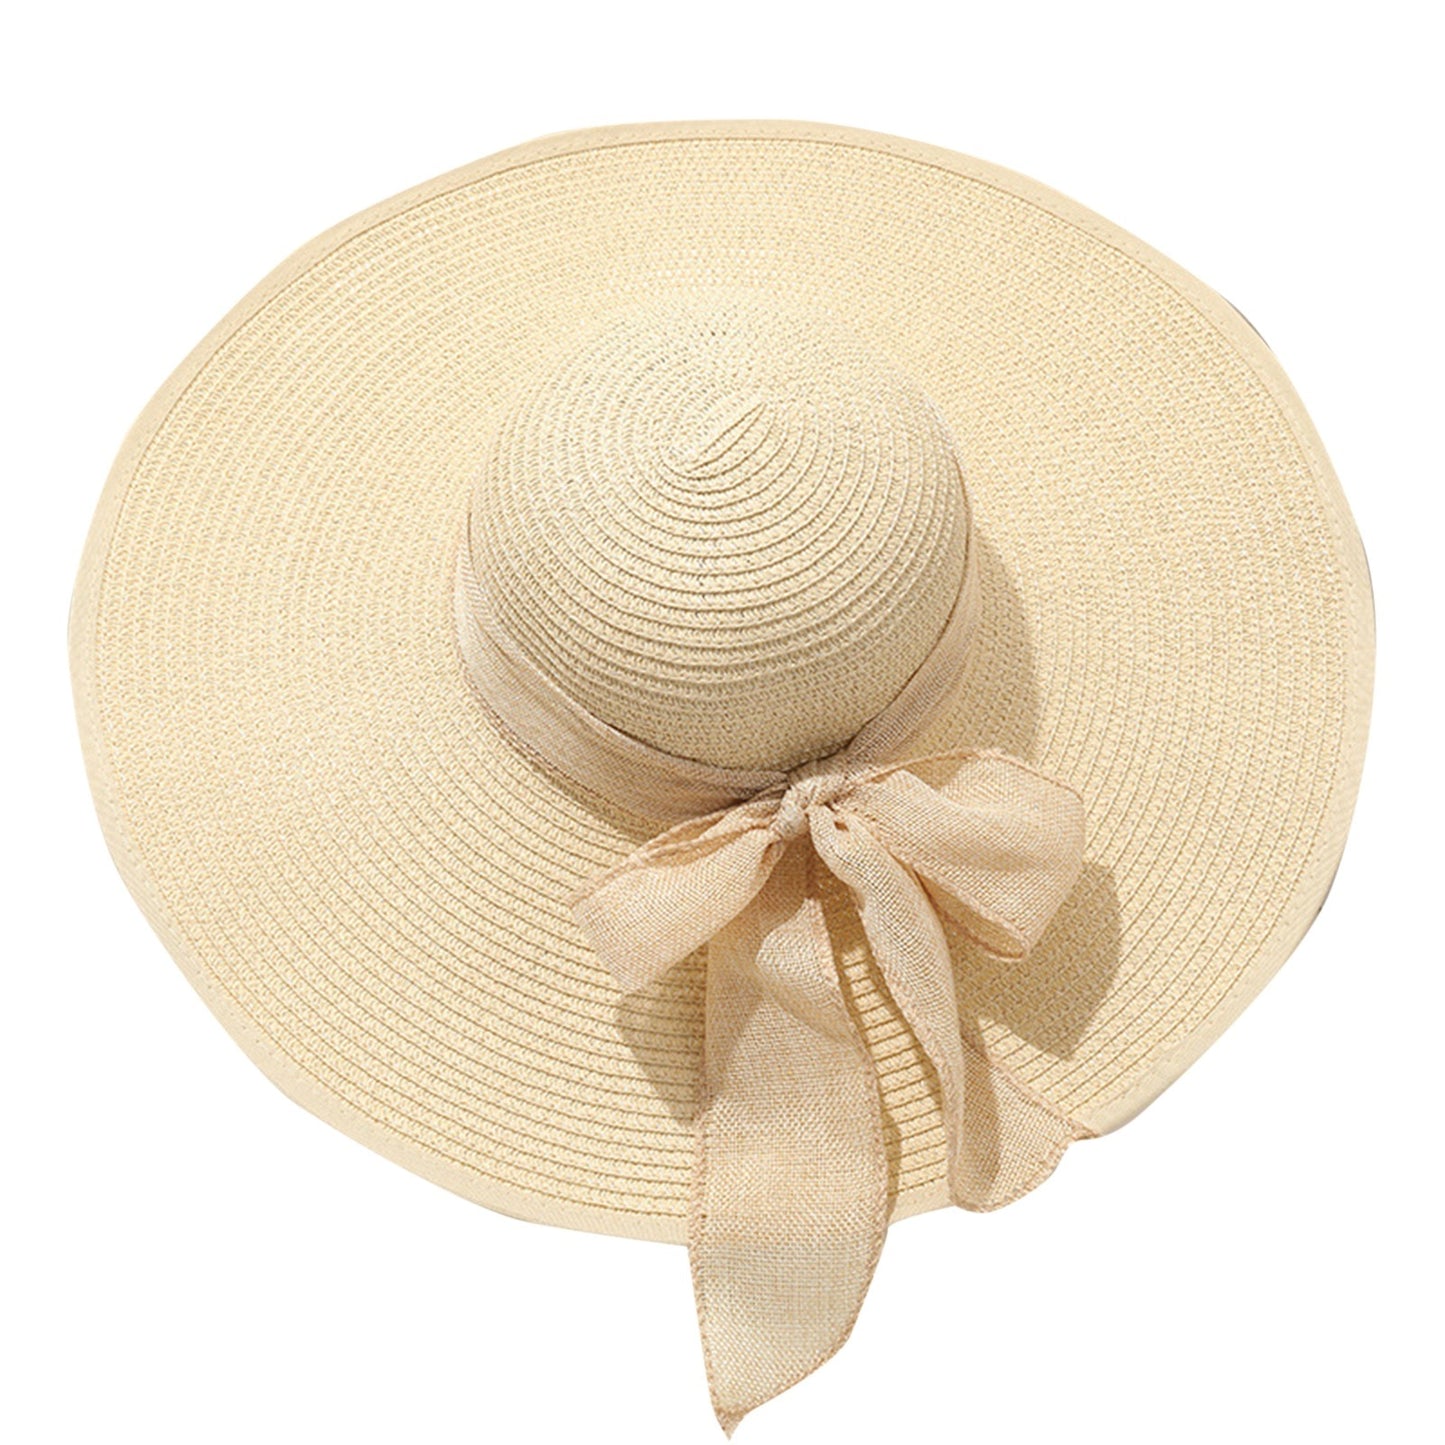 "Vacation Mood: On" Big Brim Sun Hat with Bow